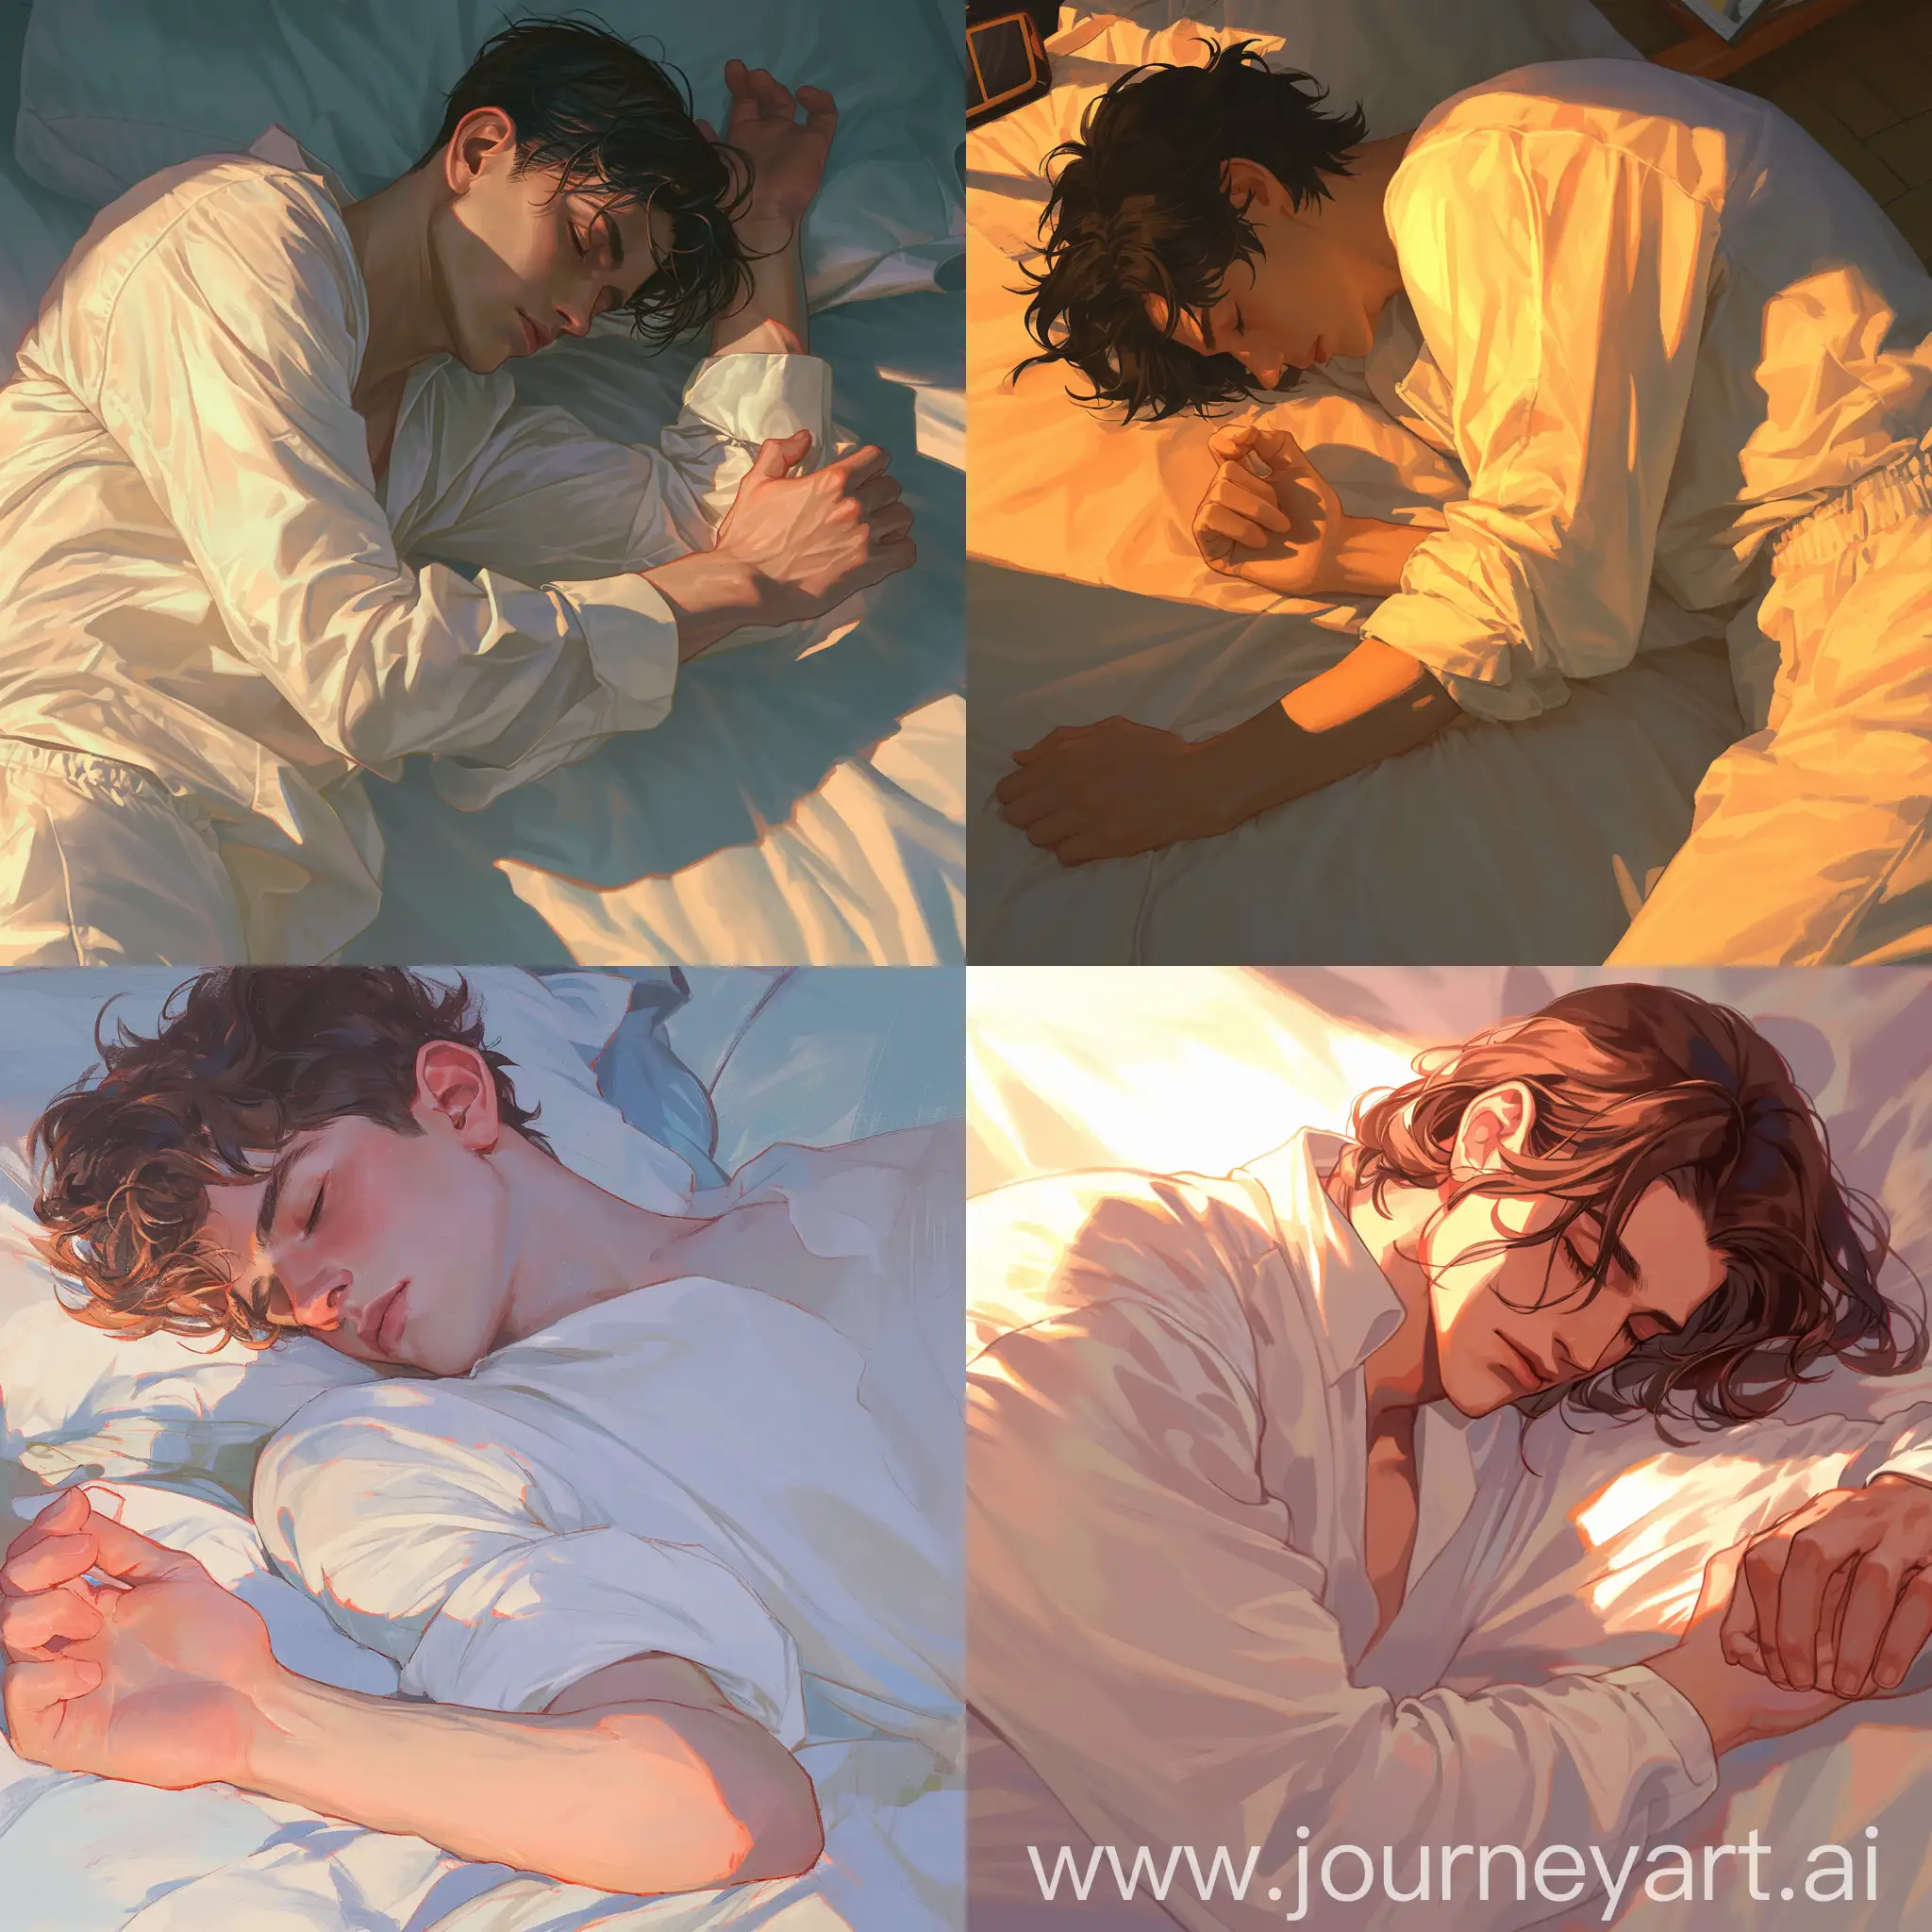 Tranquil-Sleep-Young-Man-Rests-Peacefully-in-White-Attire